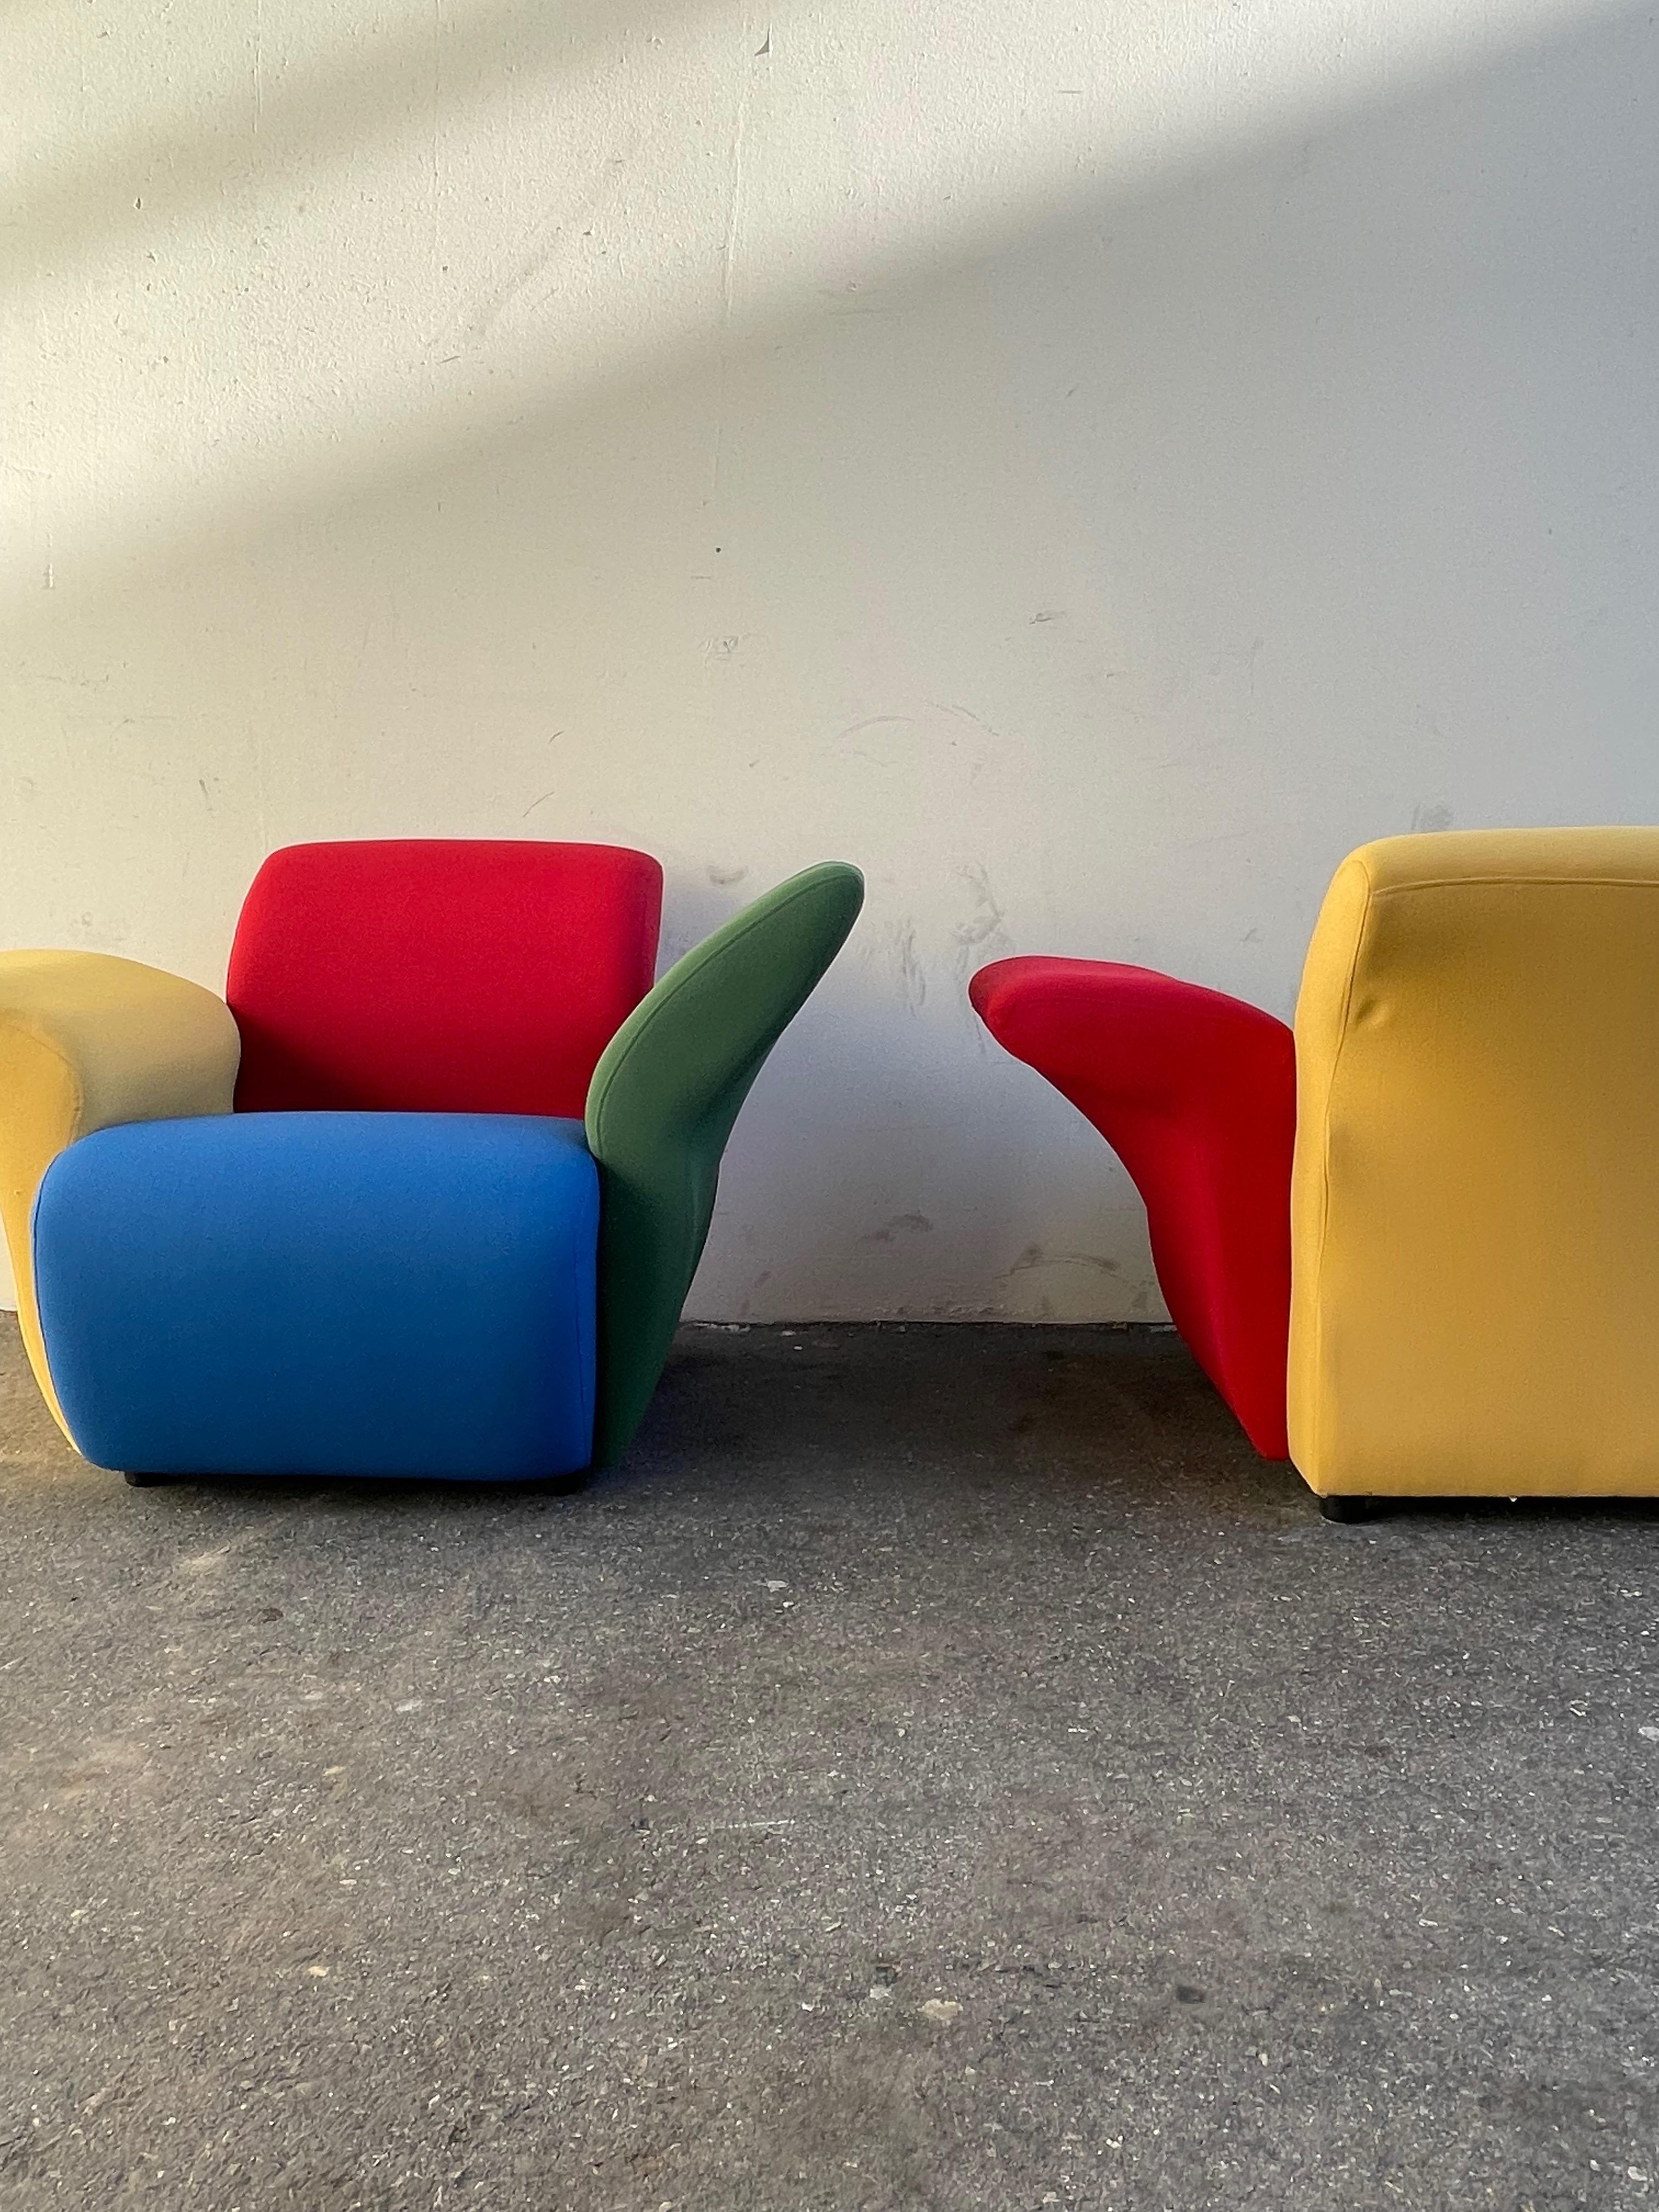 Postmodern Multicolor Lounge Chairs by David Burry, Montreal, 1980s For Sale 4